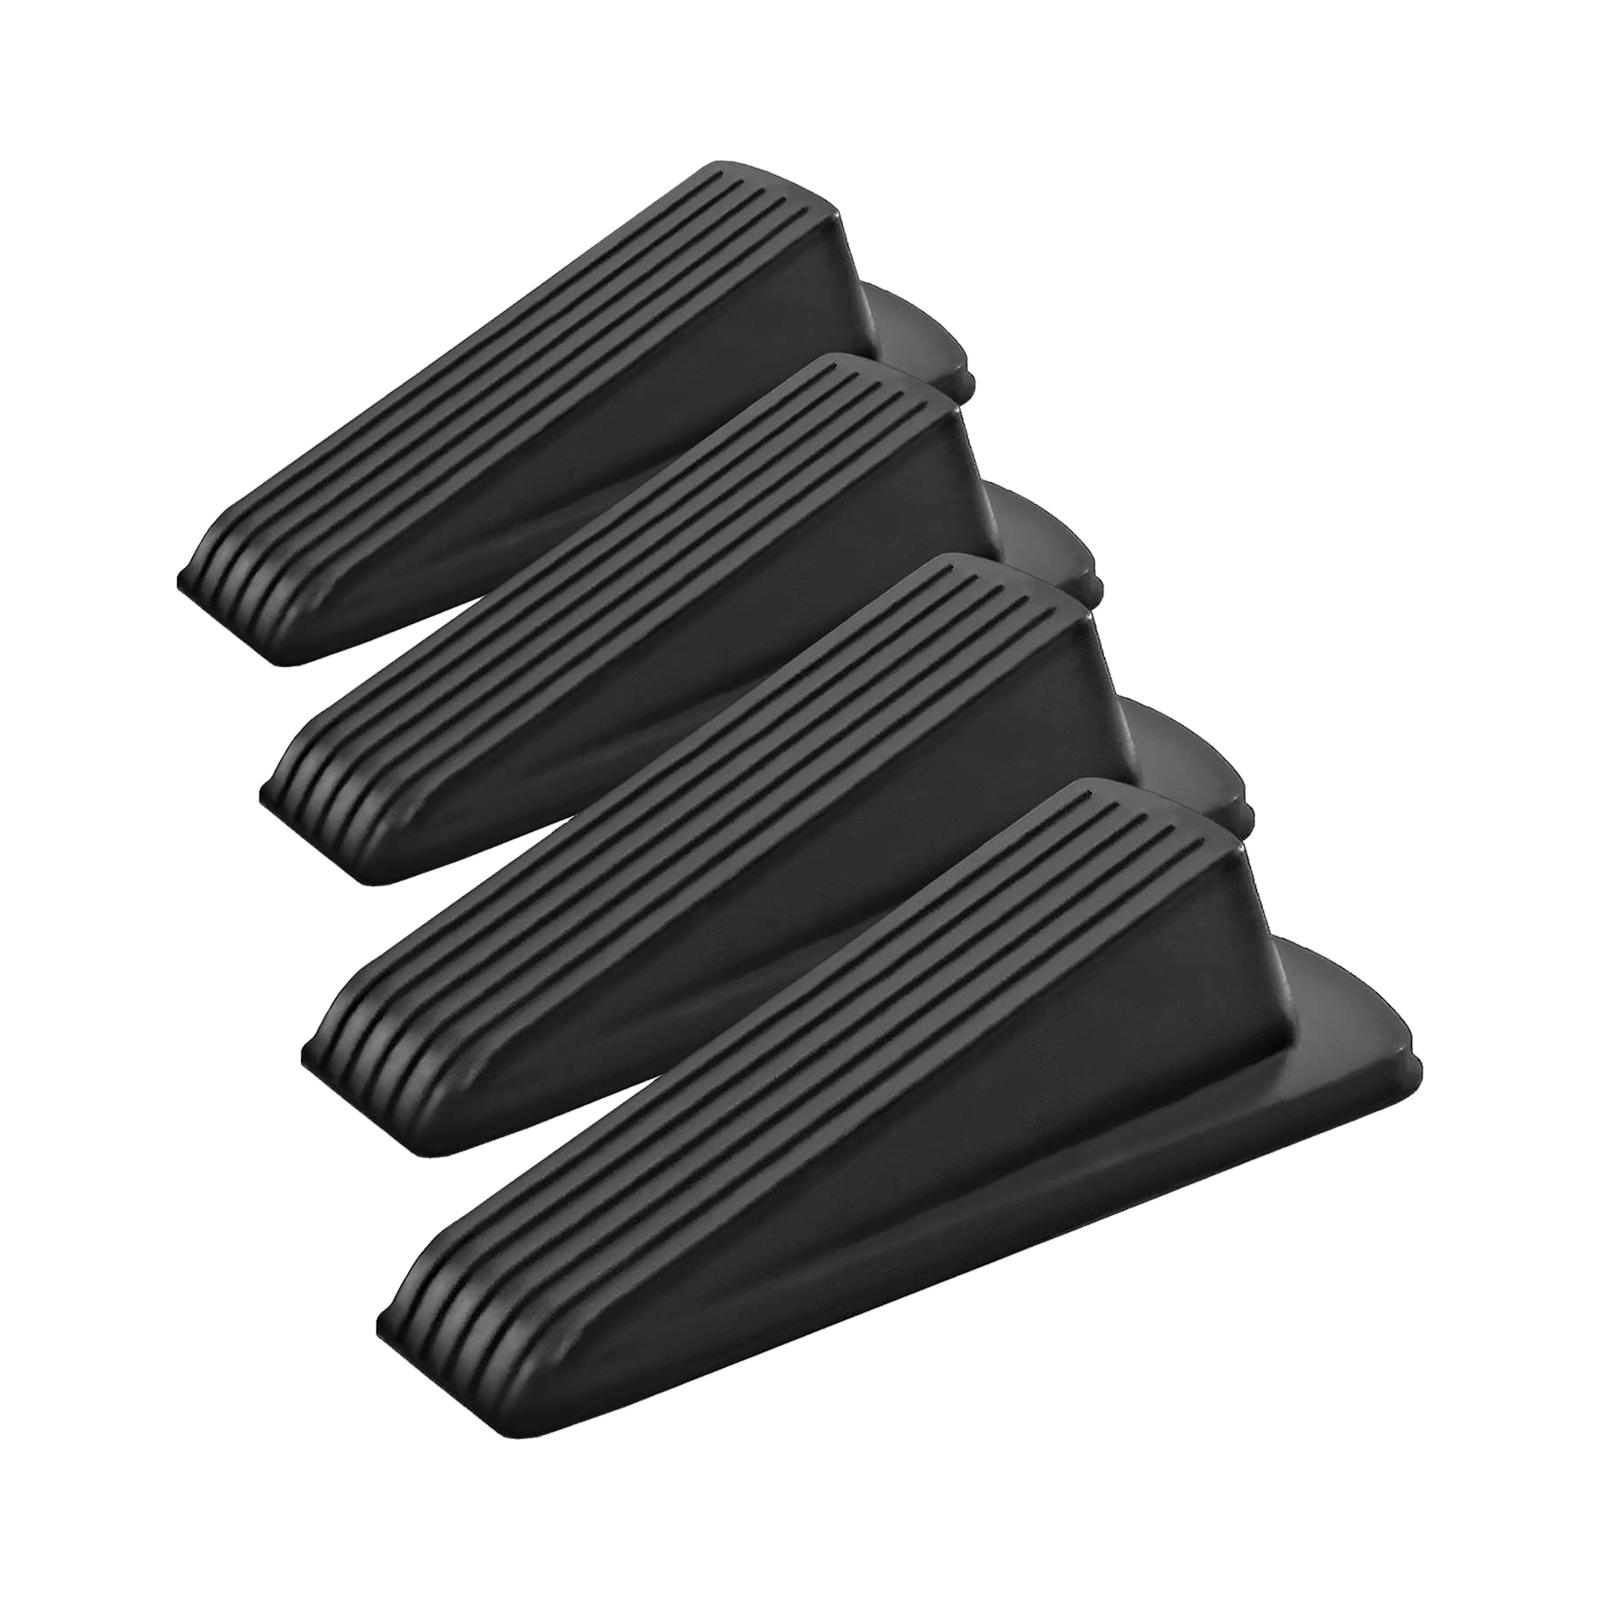 4Pcs Rubber Door Stopper Floor Protection for Commercial Hotel Residential